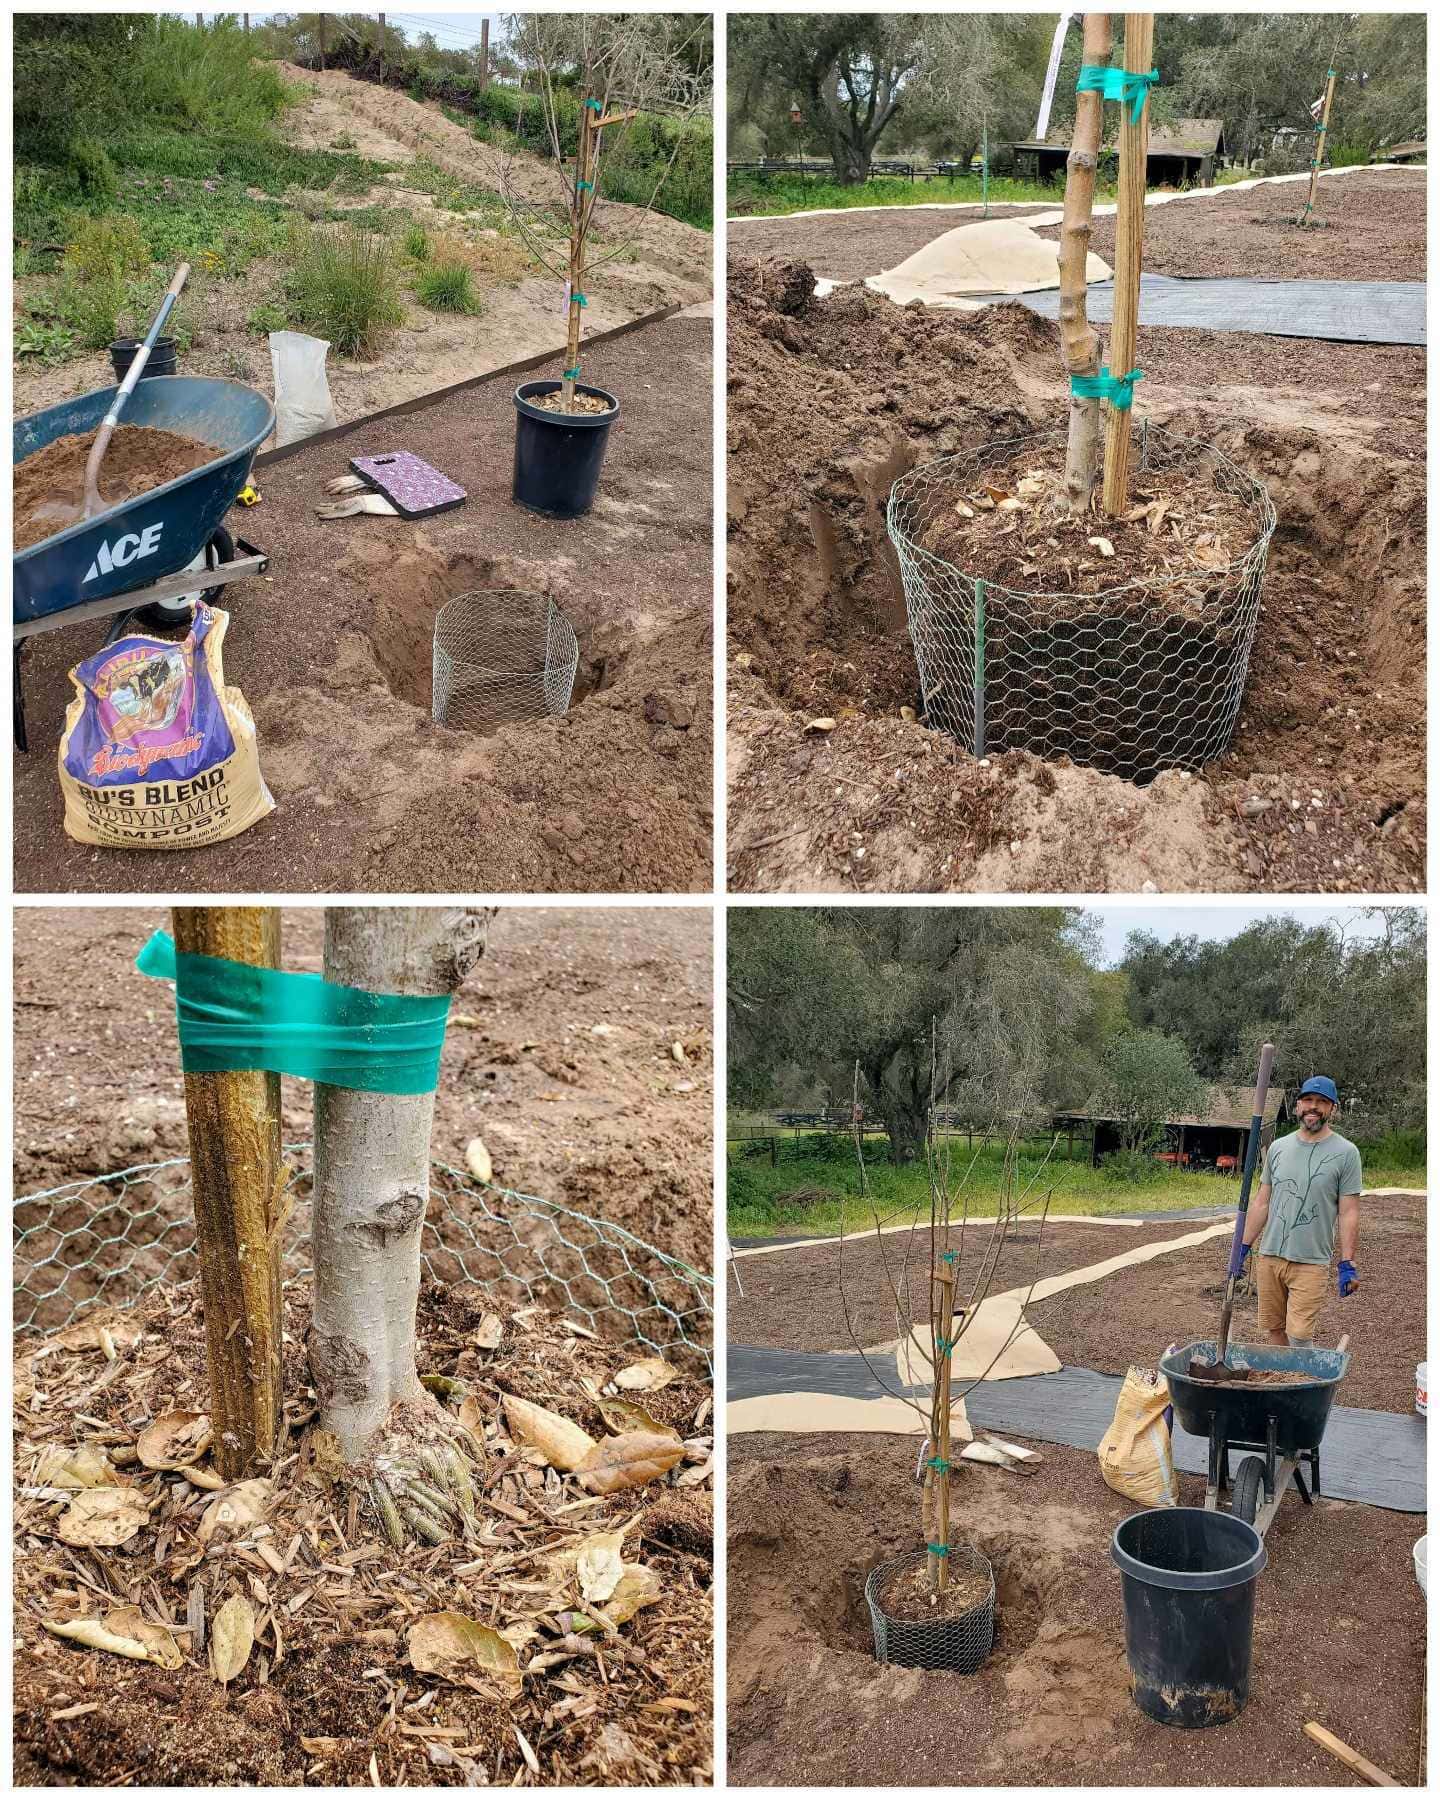 A four way image collage, the first image shows a large hole dug in the ground with a 15 gallon gopher cage sitting in the hole, a bag of compost off to the side next to a wheelbarrow full of native soil, beyond the hole there is an apple tree in a 15 gallon nursery pot. The second image shows the tree and its root ball sitting inside the gopher cage. The third image shows a close up of the bottom of the tree trunk, the fourth image shows Aaron standing beyond the wheel barrow, the tree and the hole have been partially filled with compost and soil. 